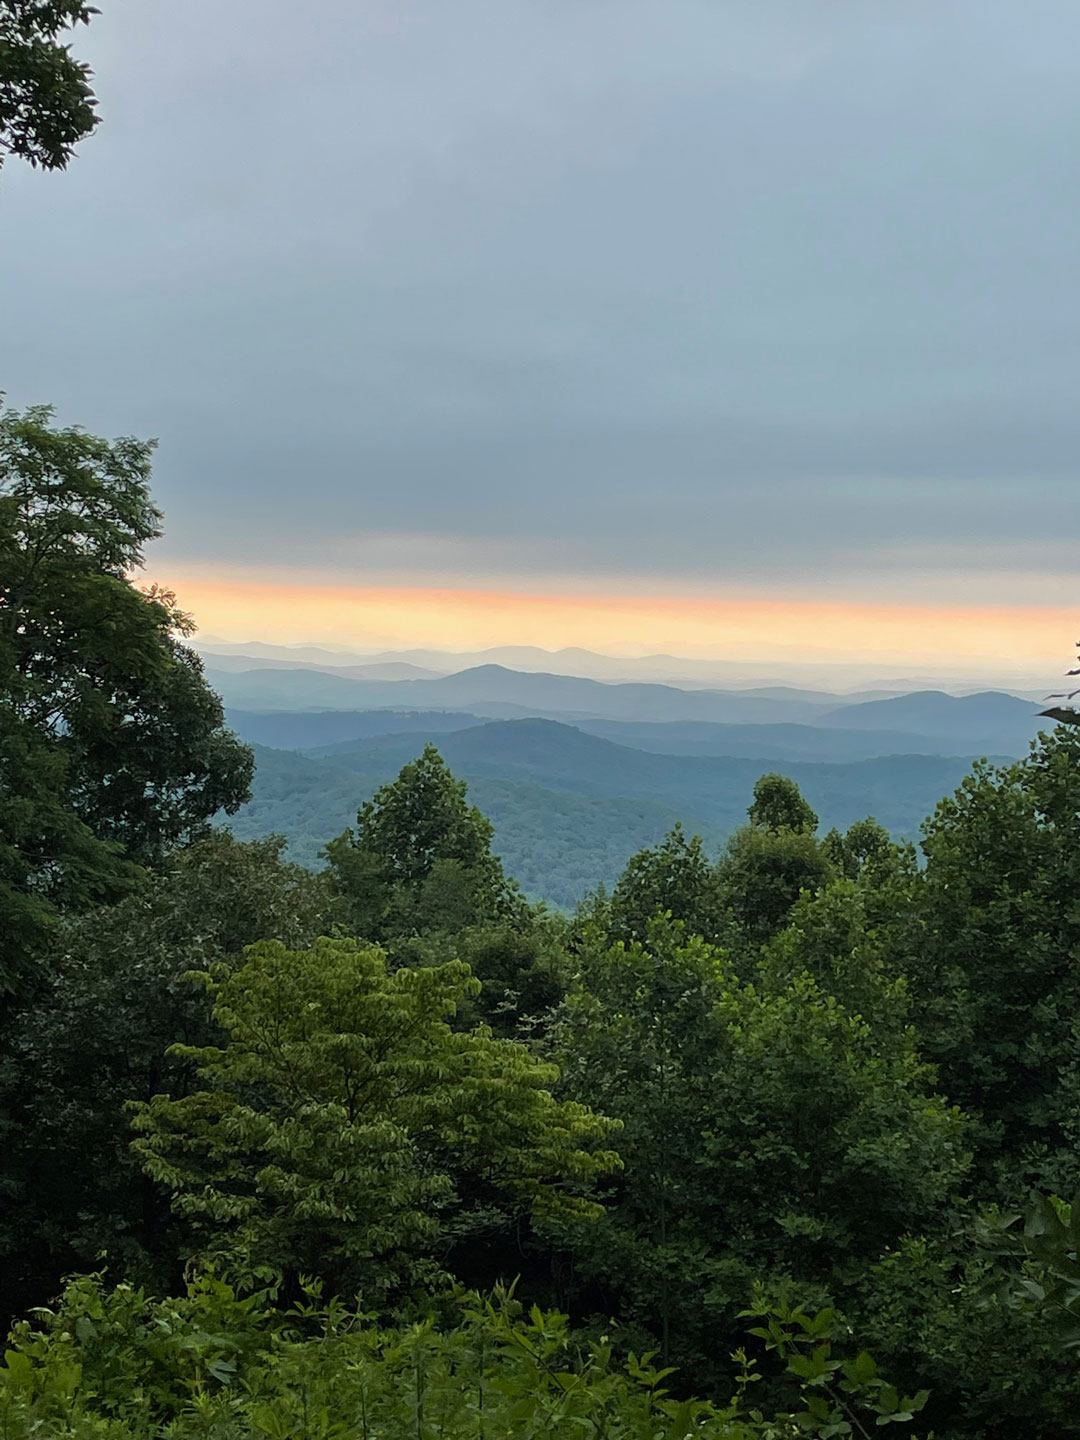 Sunrise over the Northern Georgia Appalachian Mountains from the Len Foote Hike Inn. Photo by Marianne Skeen